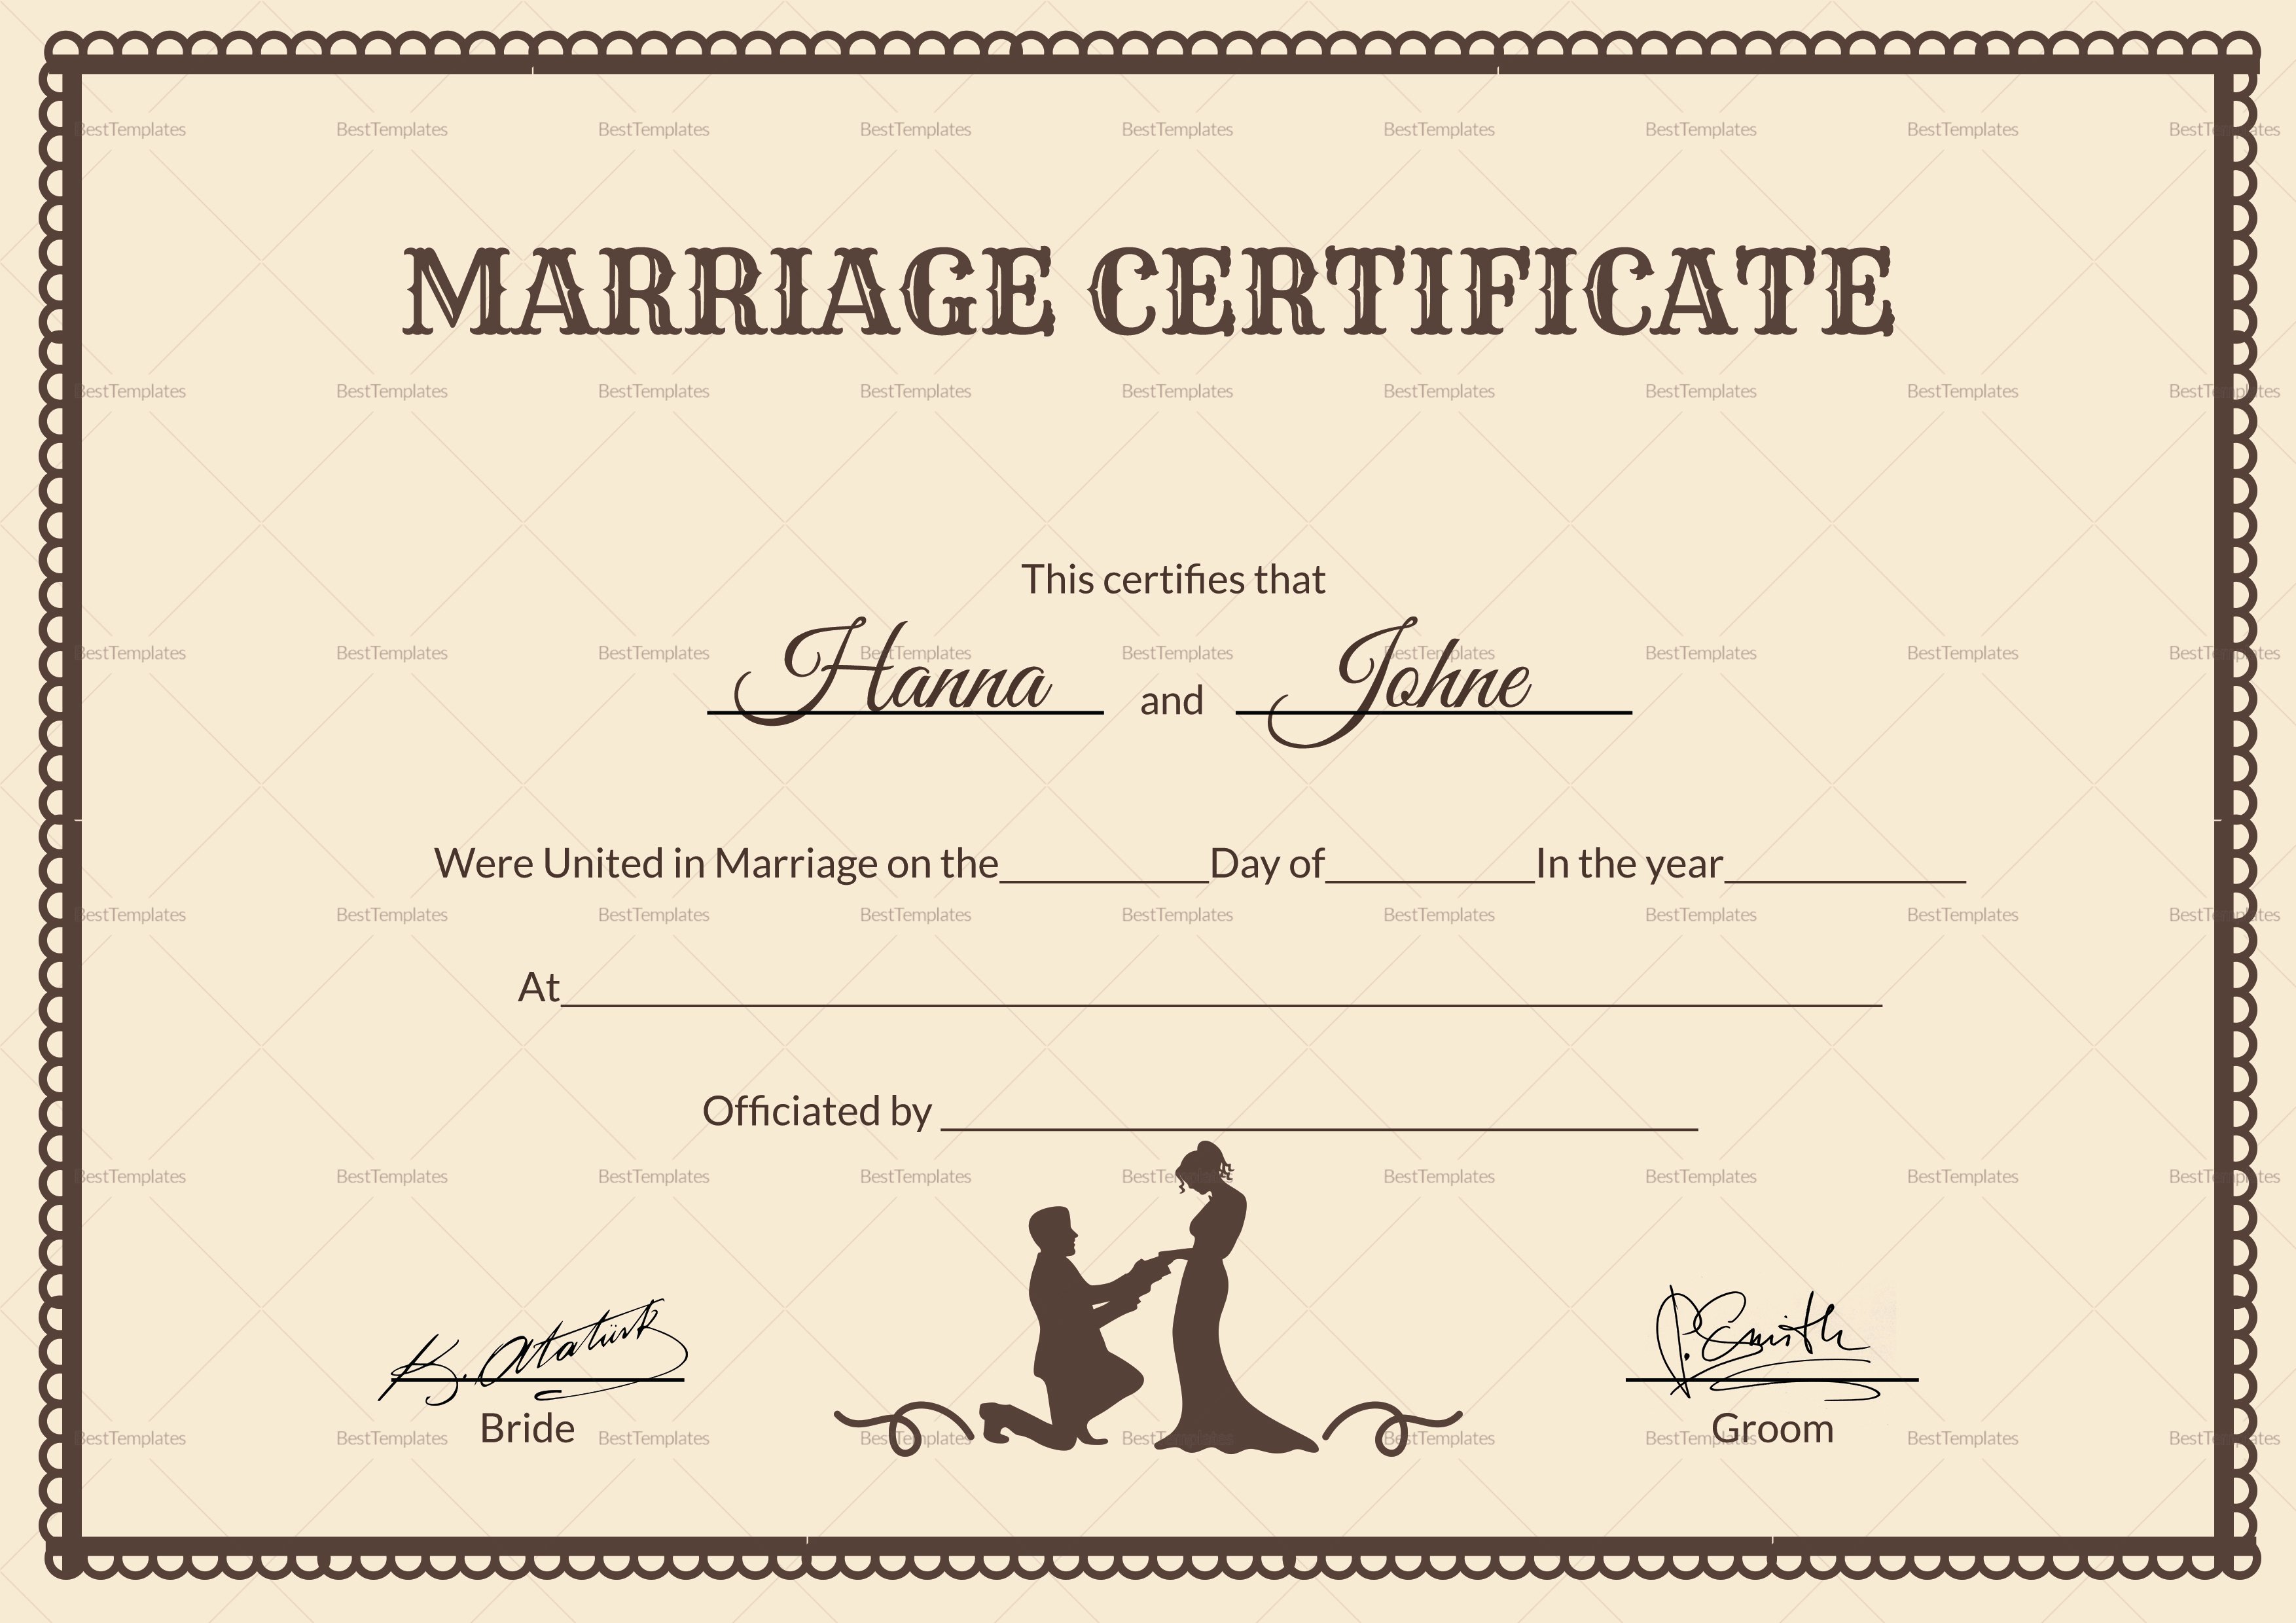 Marriage Certificate Template Microsoft Word New Vintage Marriage Certificate Design Template In Psd Word